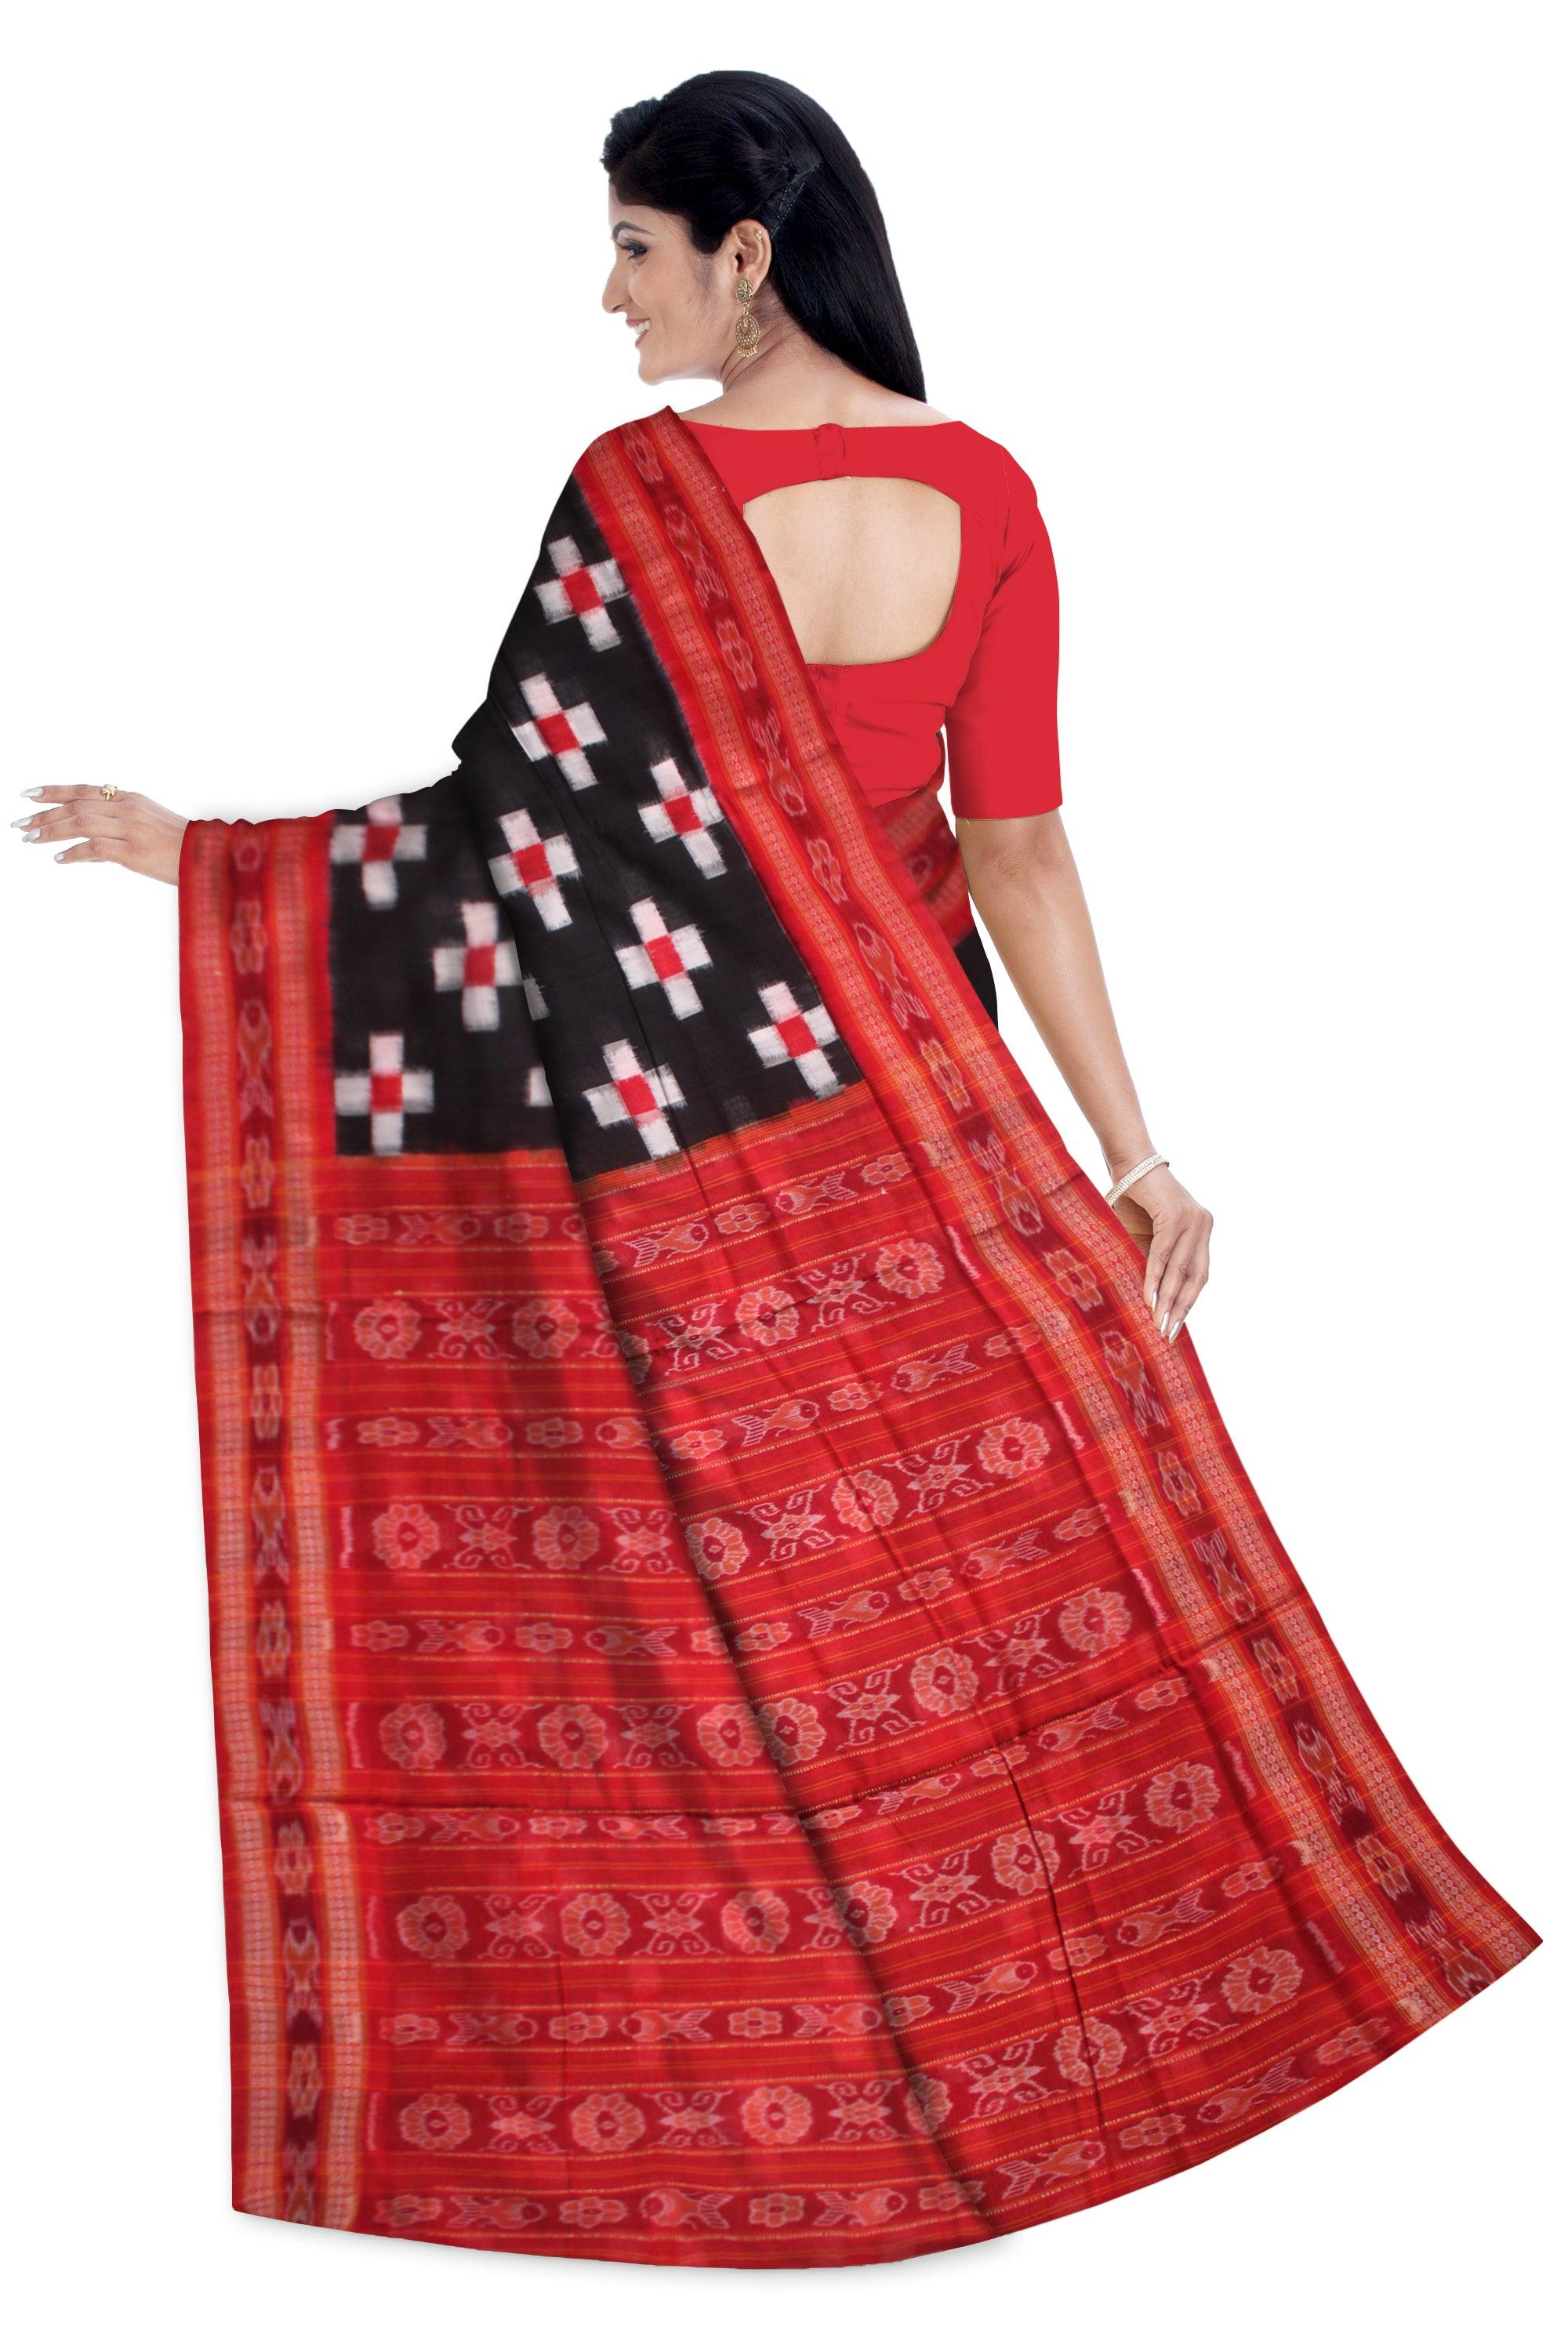 SONEPUR PASAPALI DESIGN SAREE IN BLACK, RED AND WHITE COLOR, WITH OUT BLOUSE PIECE. - Koshali Arts & Crafts Enterprise